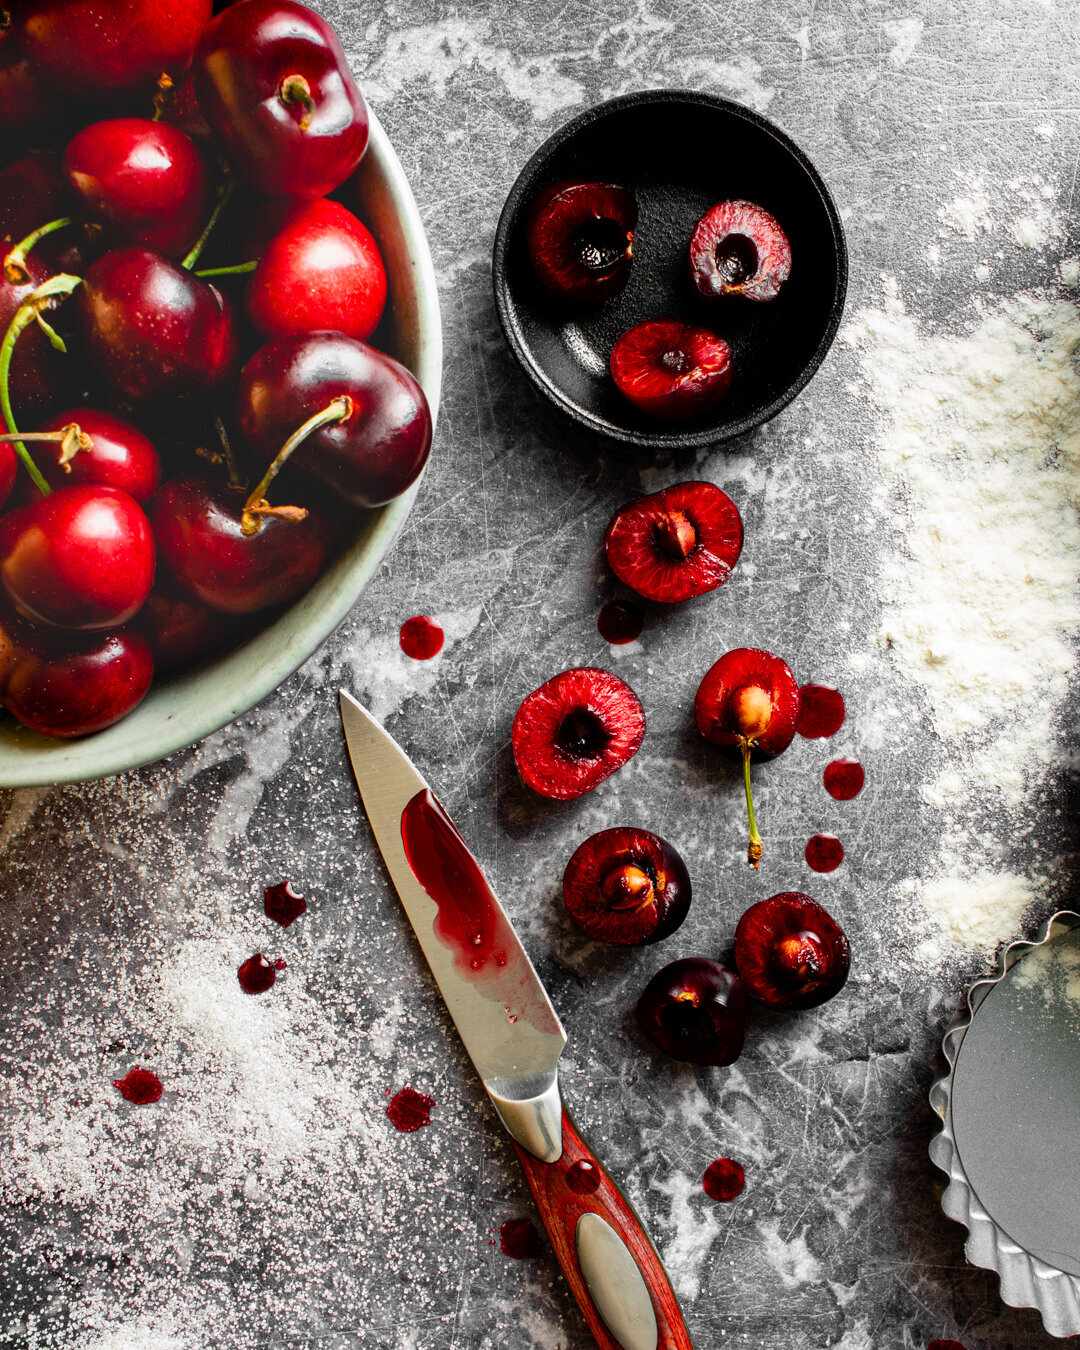 A bowl of cherries with some cut cherries on a work top with a knife